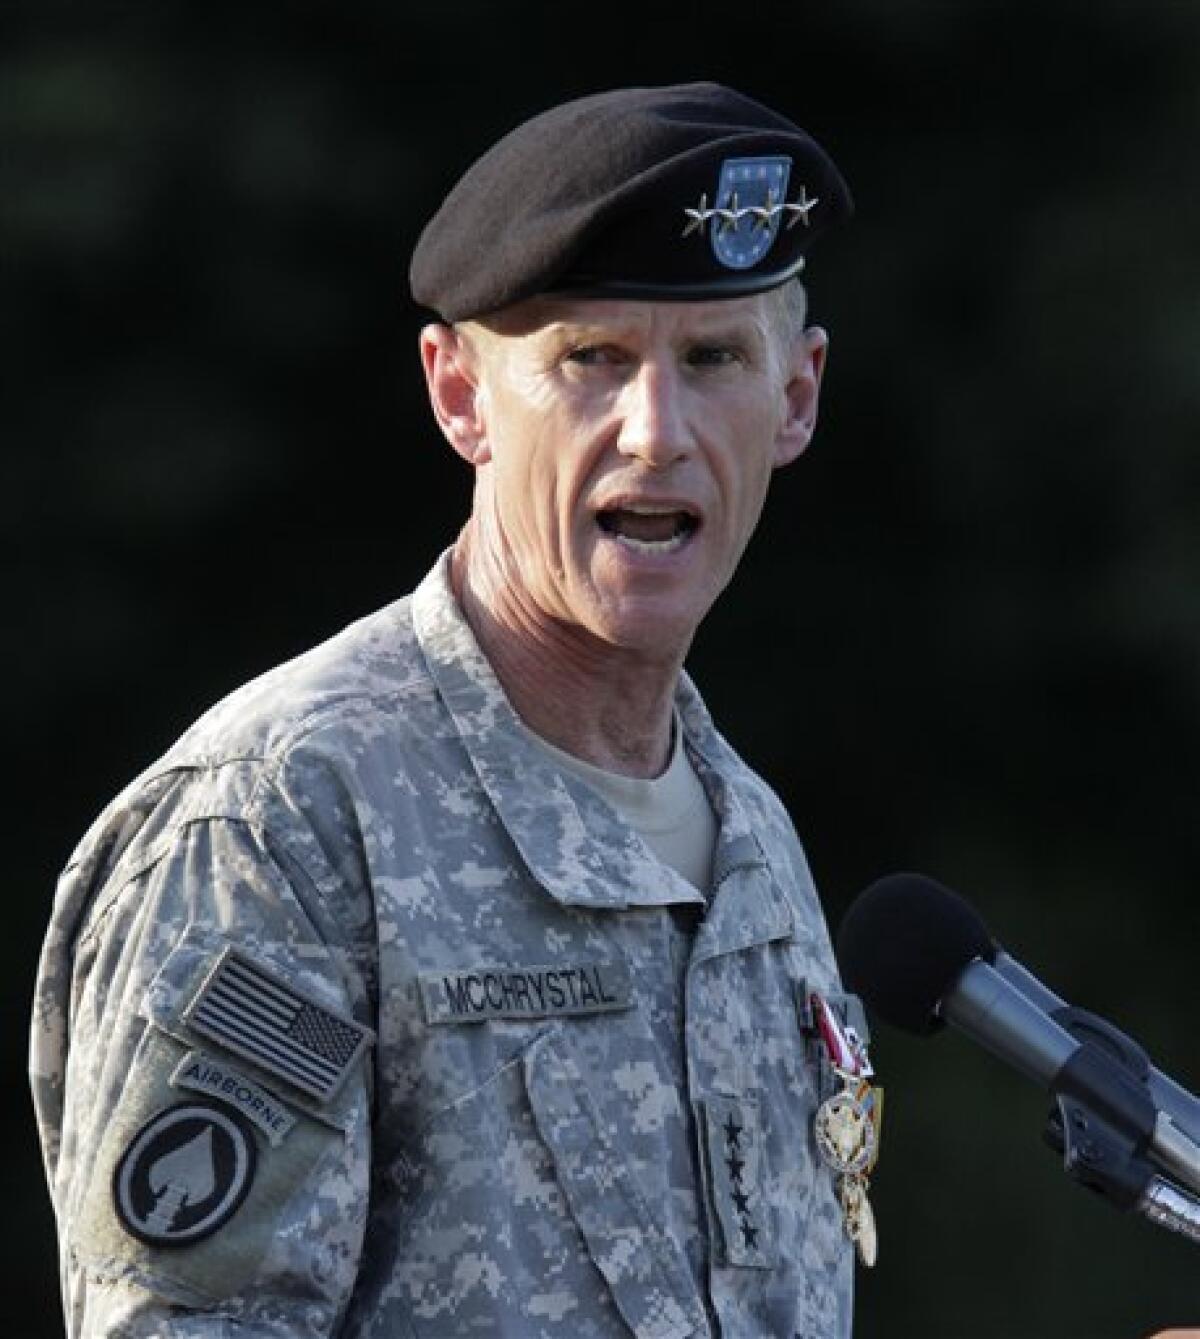 Gen. Stanley McChrystal speaks as he is honored at a retirement ceremony at Fort McNair in Washington, Friday, July 23, 2010. McChrystal's illustrious career came to an abrupt end when he resigned as the top U.S. commander in Afghanistan after he and his staff were quoted in a Rolling Stone magazine article criticizing and mocking key Obama Administration officials. (AP Photo/J. Scott Applewhite)